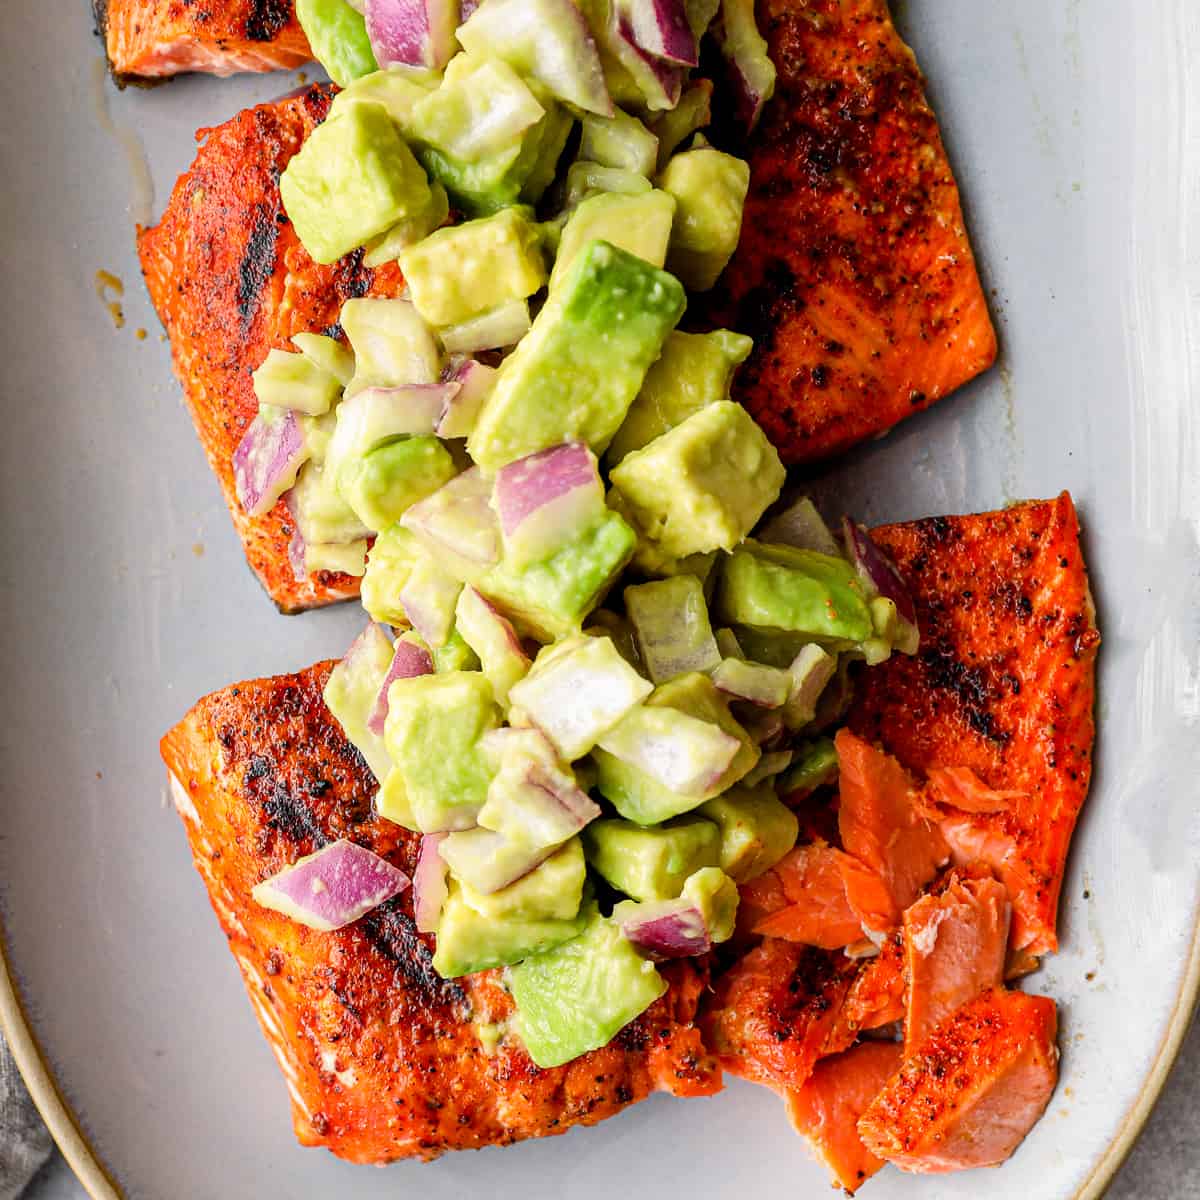 https://www.thecookierookie.com/wp-content/uploads/2014/01/featured-grilled-salmon-with-avocado-salsa-recipe.jpg